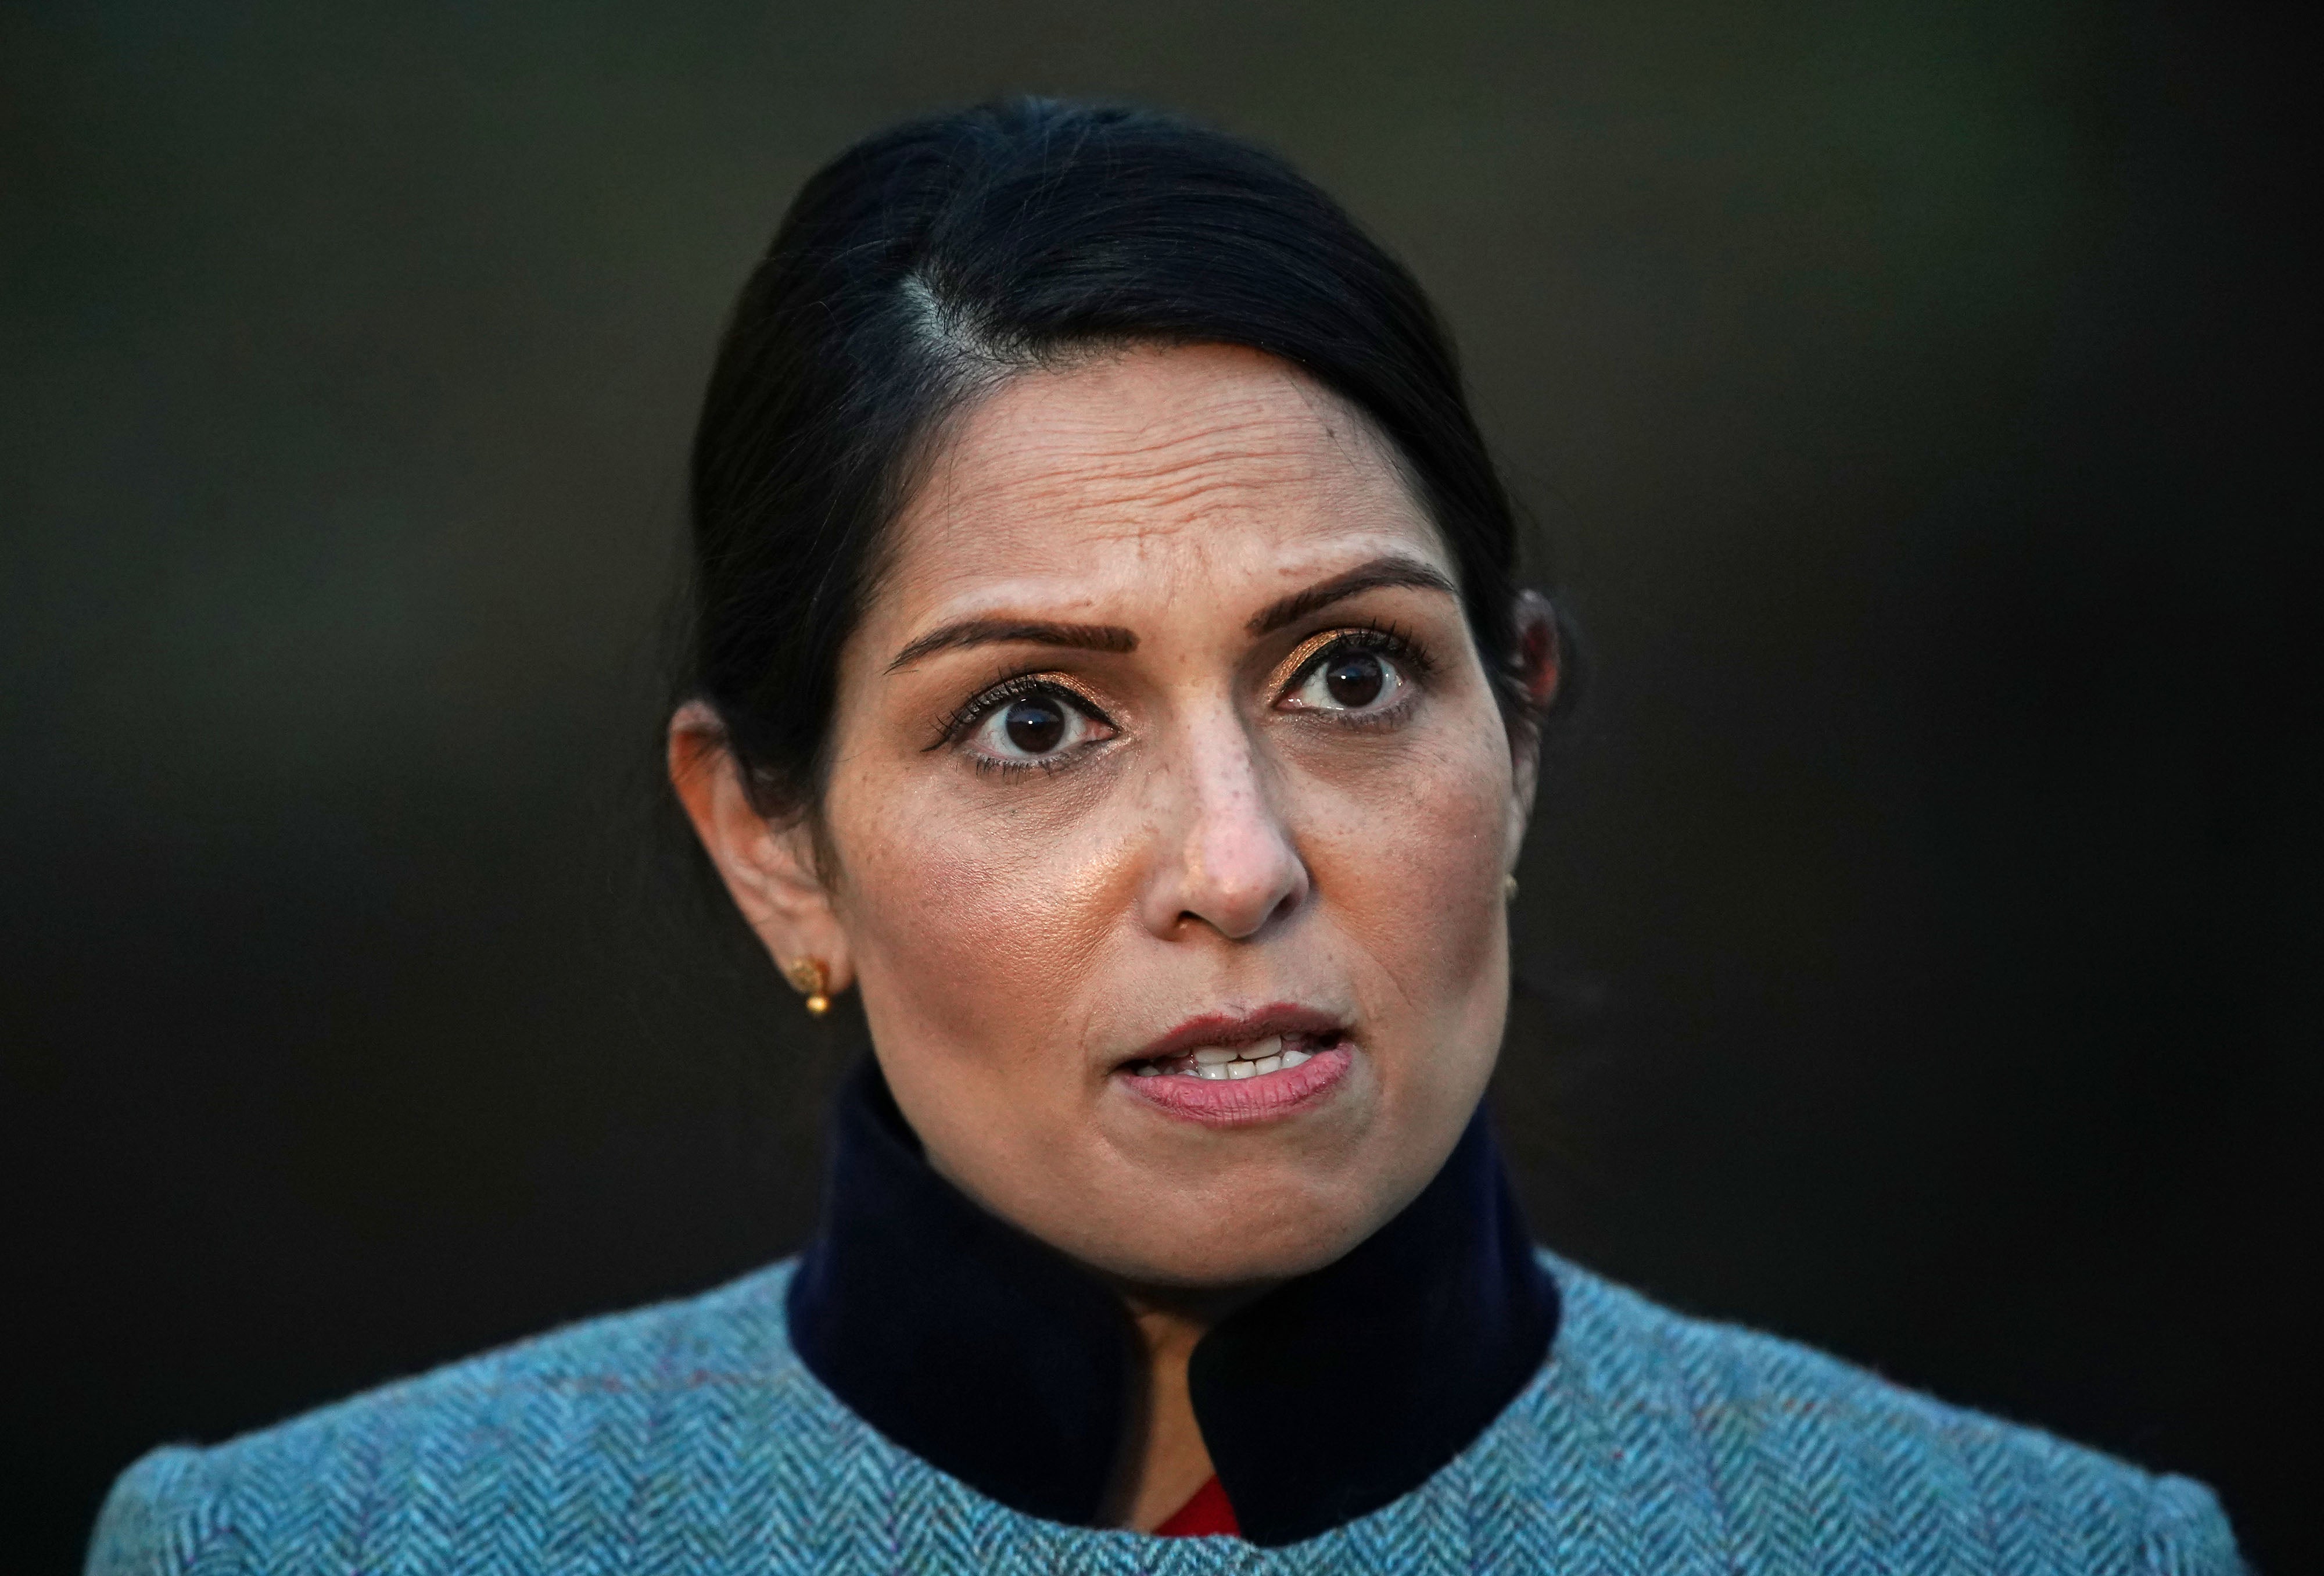 Home Secretary Priti Patel has promised to act following the latest incident at Windsor Castle (Aaron Chown/PA)